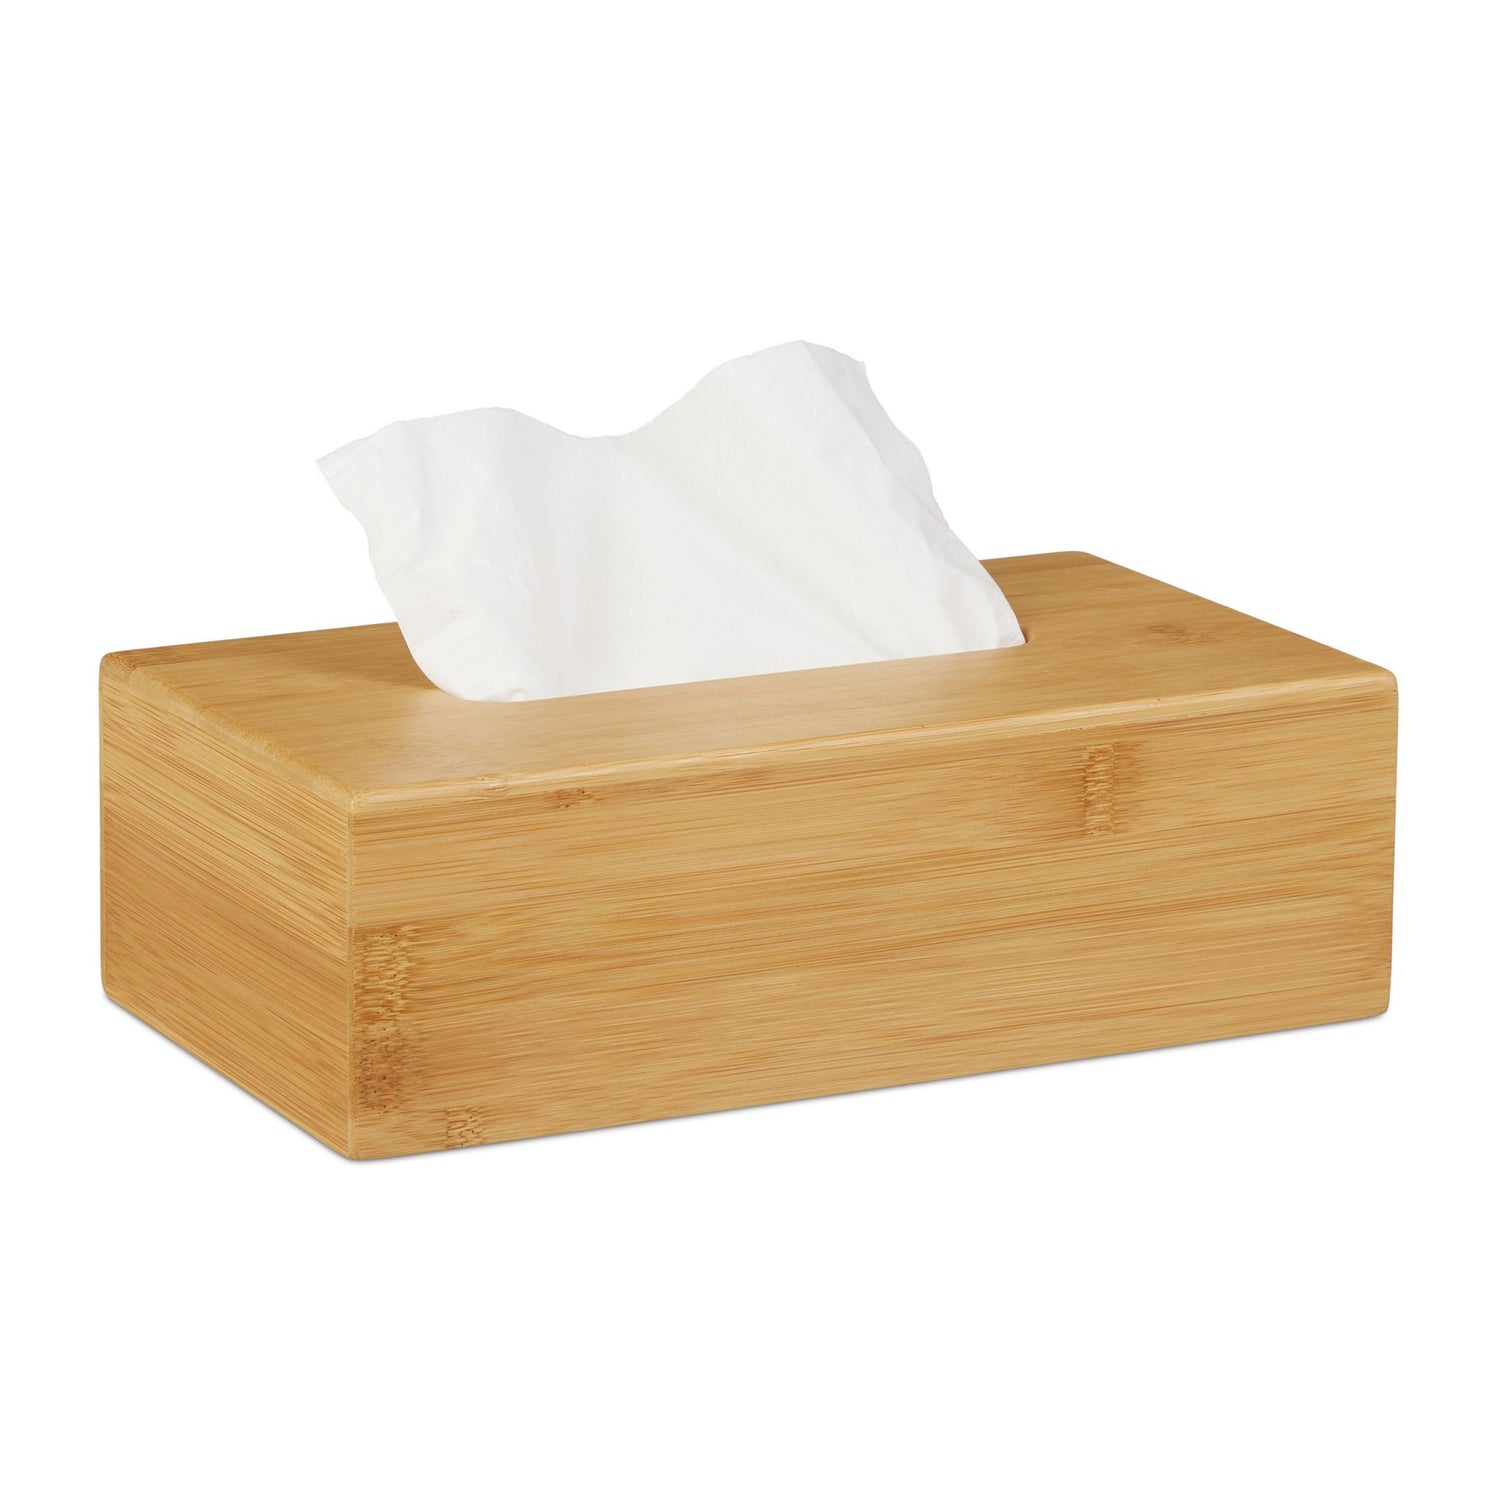 RelaxDays Bamboo Tissue Box Cover 27.5 cm Bamboo Bathrooms